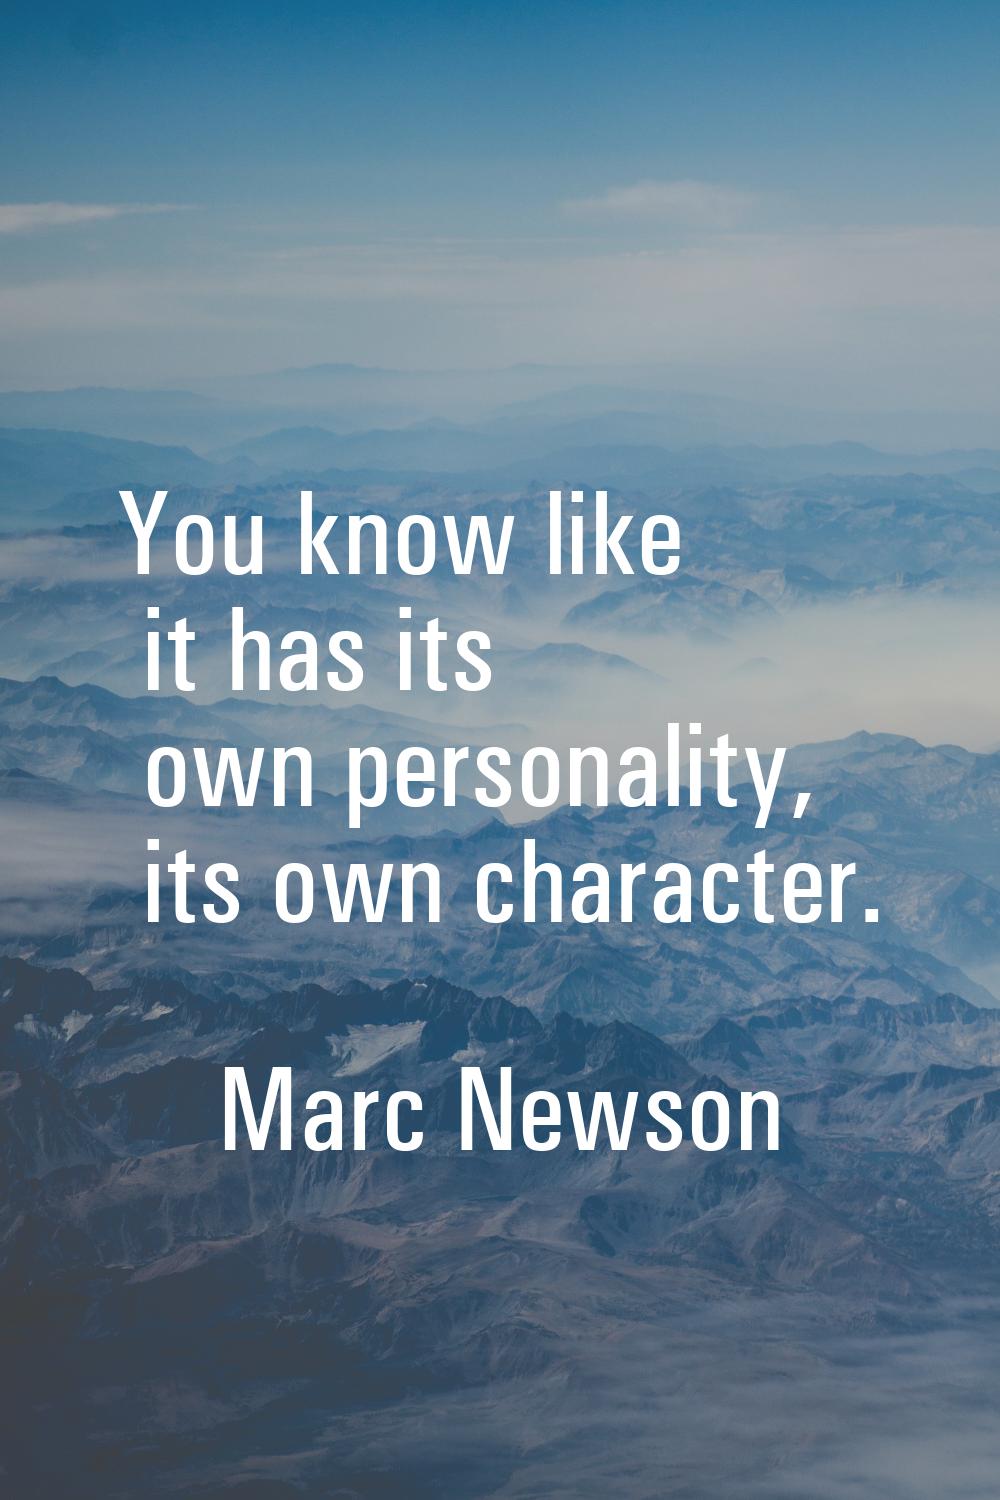 You know like it has its own personality, its own character.